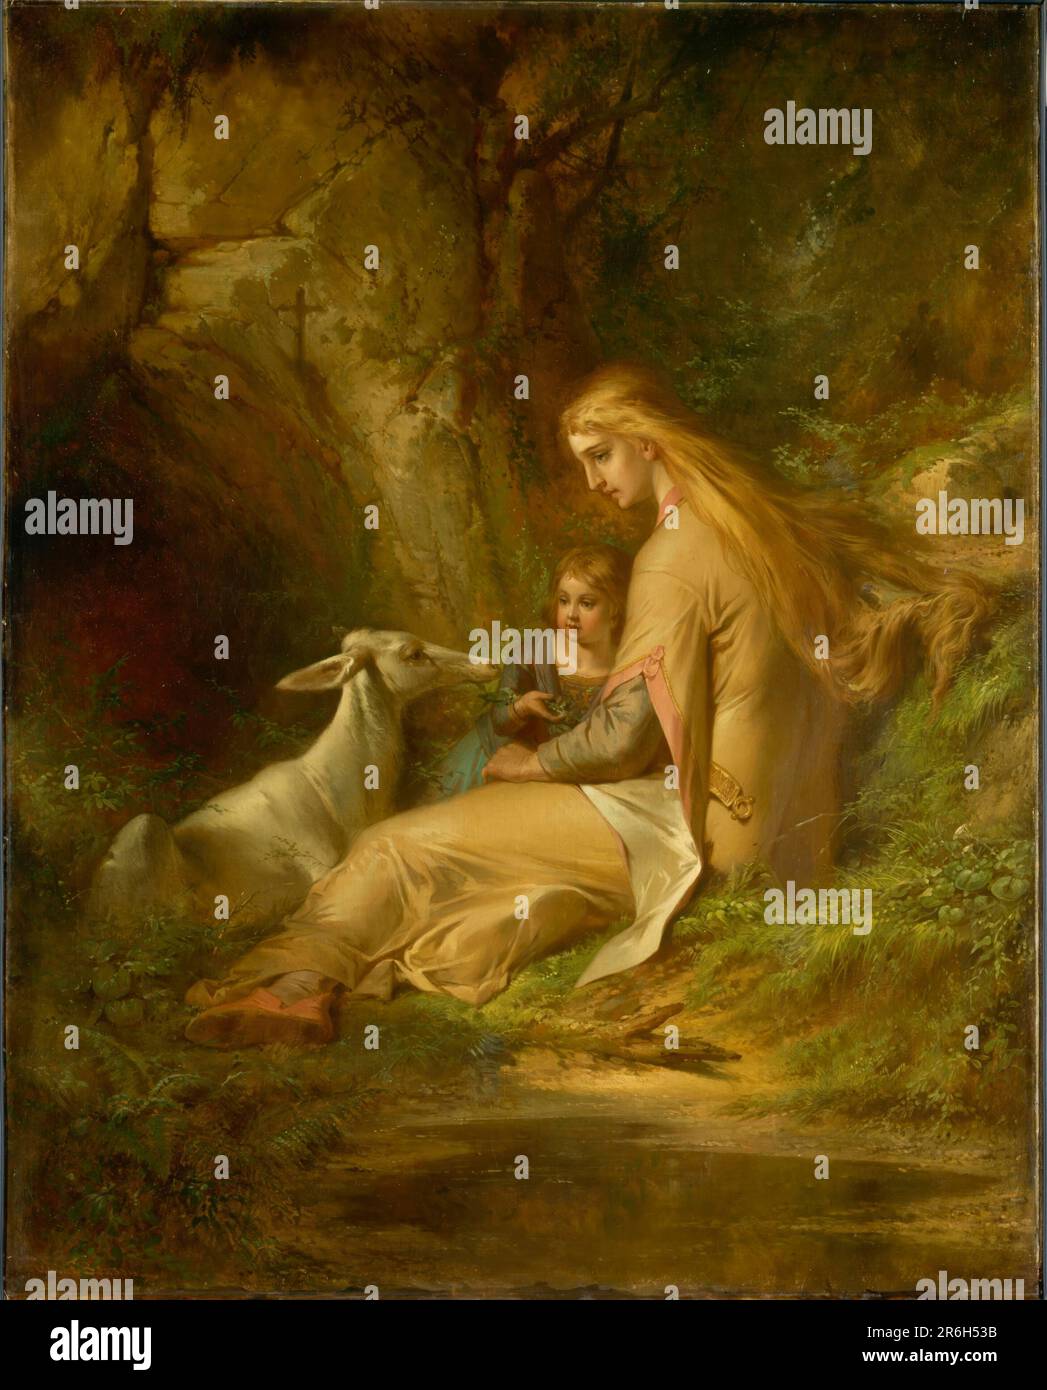 St. Genevieve of Brabant in the Forest. oil on canvas. Date: 1860s. Museum: Smithsonian American Art Museum. Stock Photo